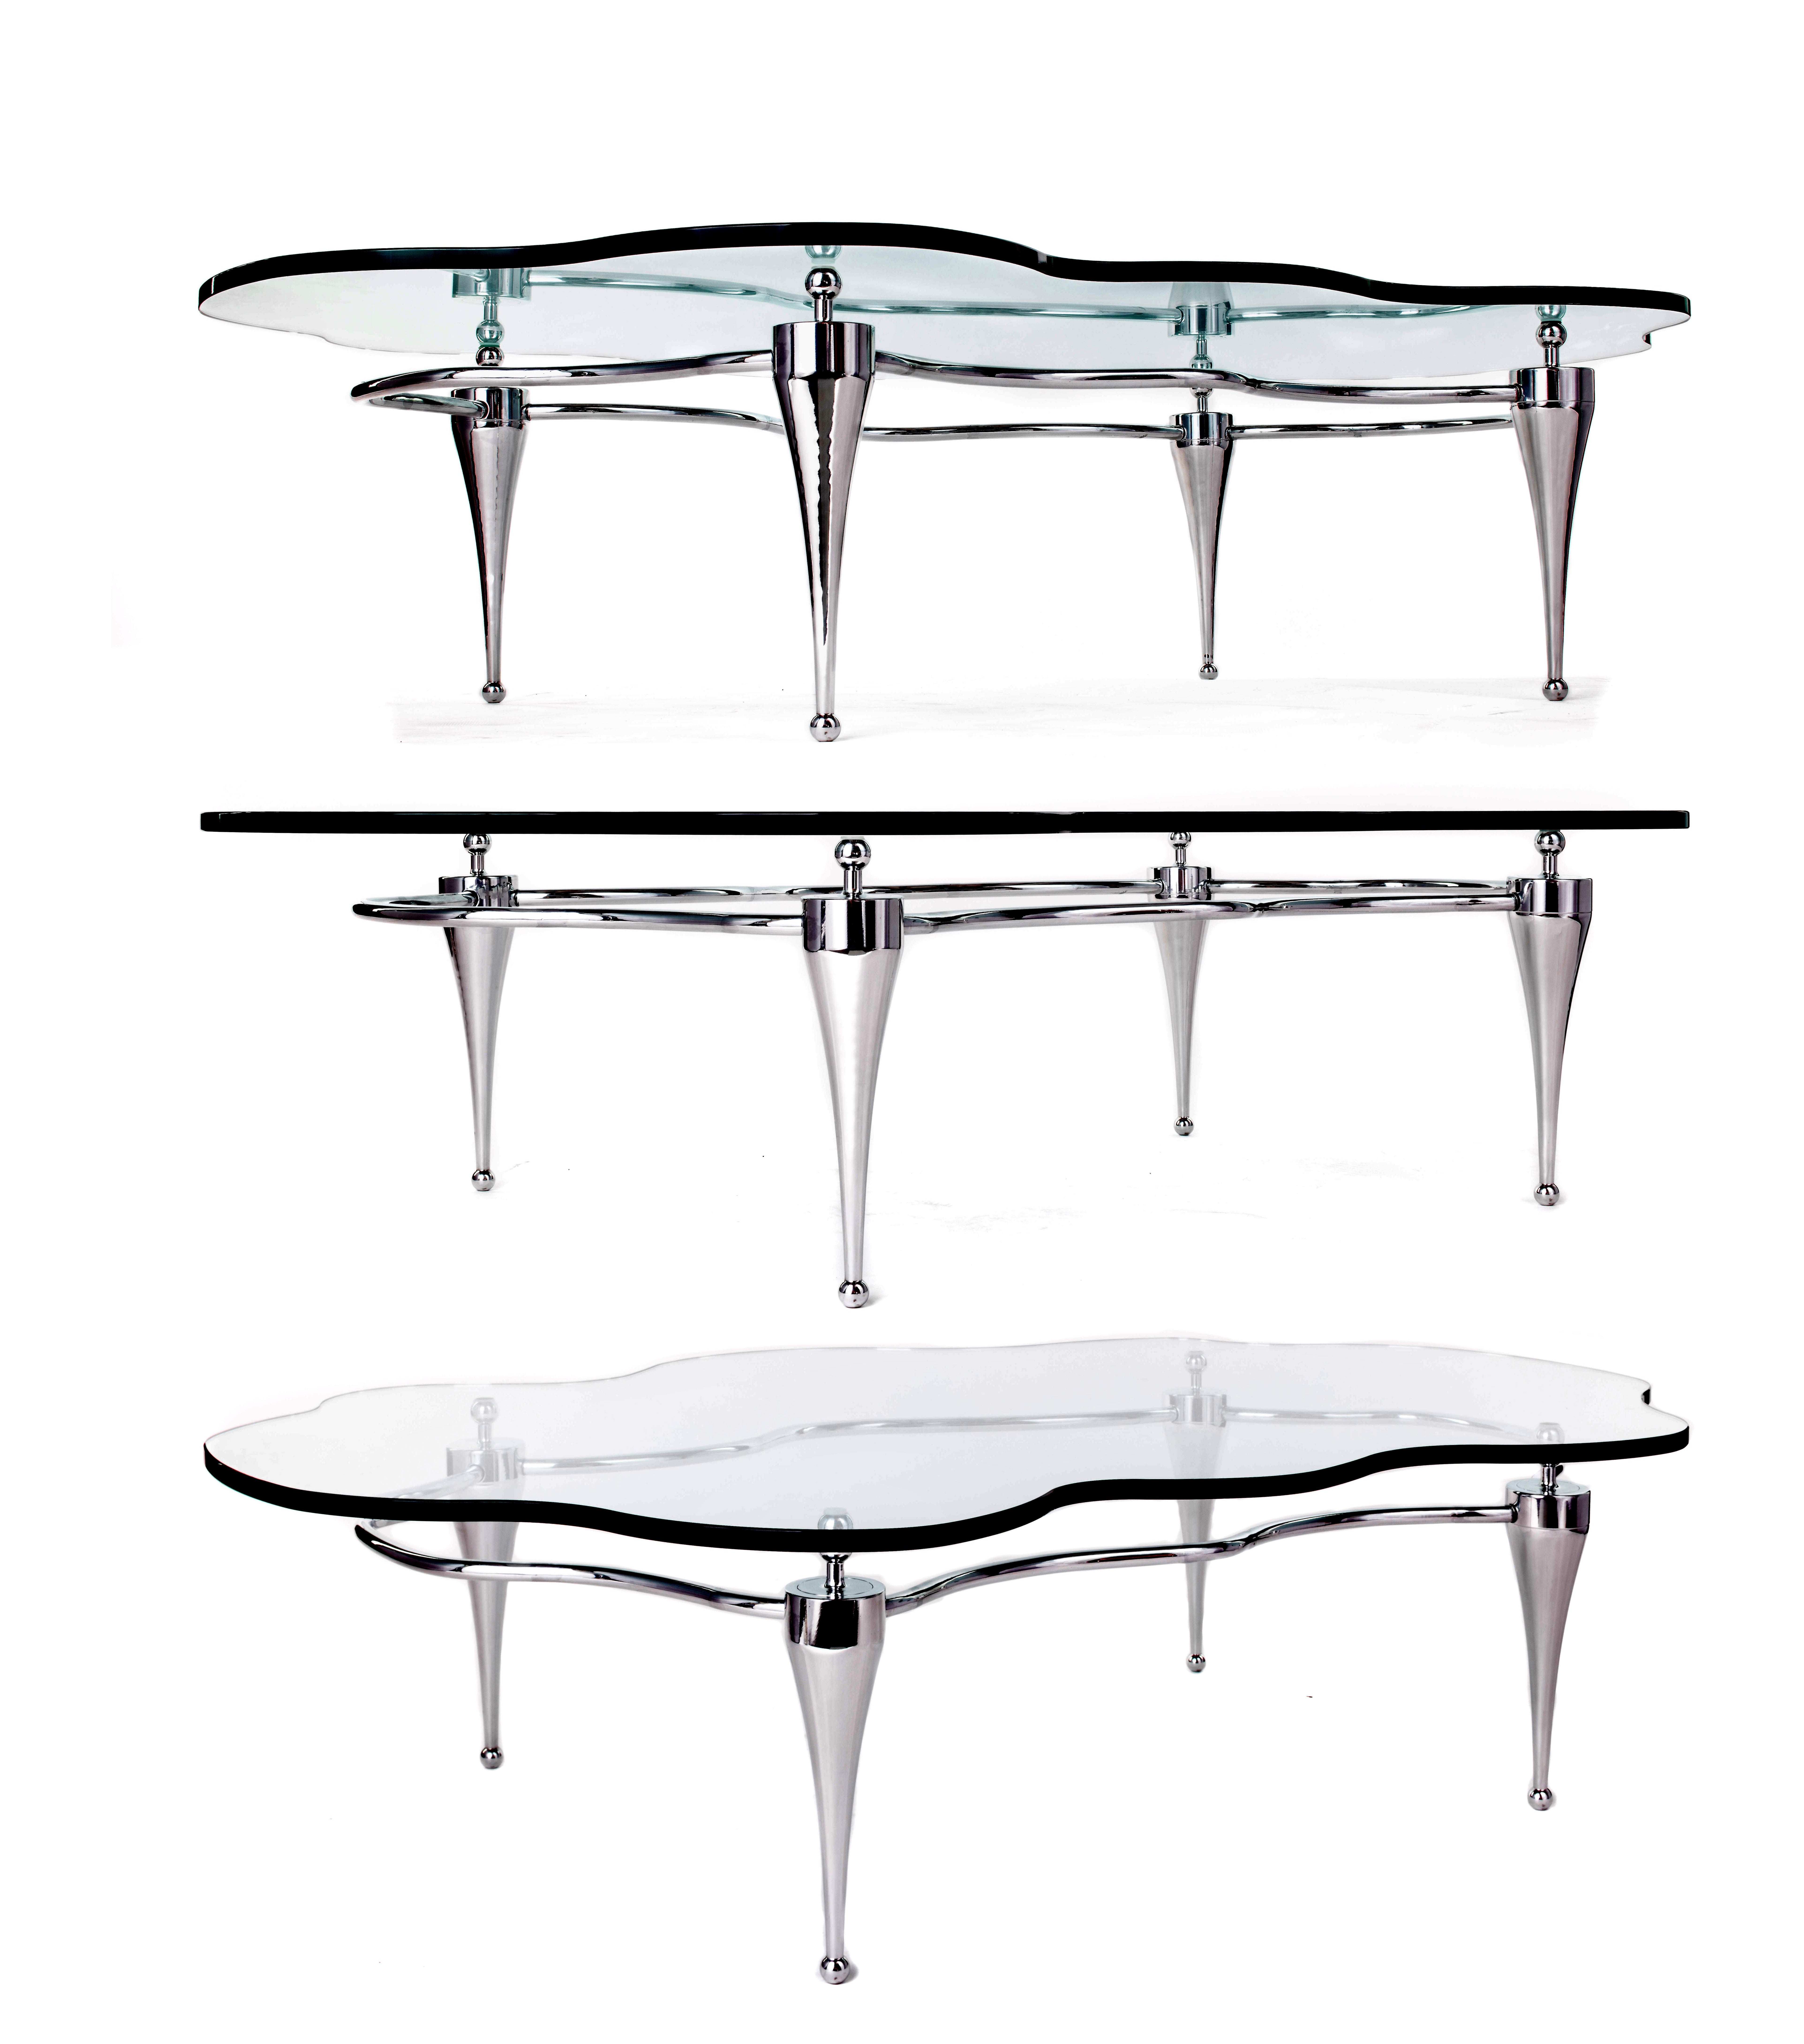 Canadian Coffee Table With Glass Top And Polished Aluminum Base For Sale